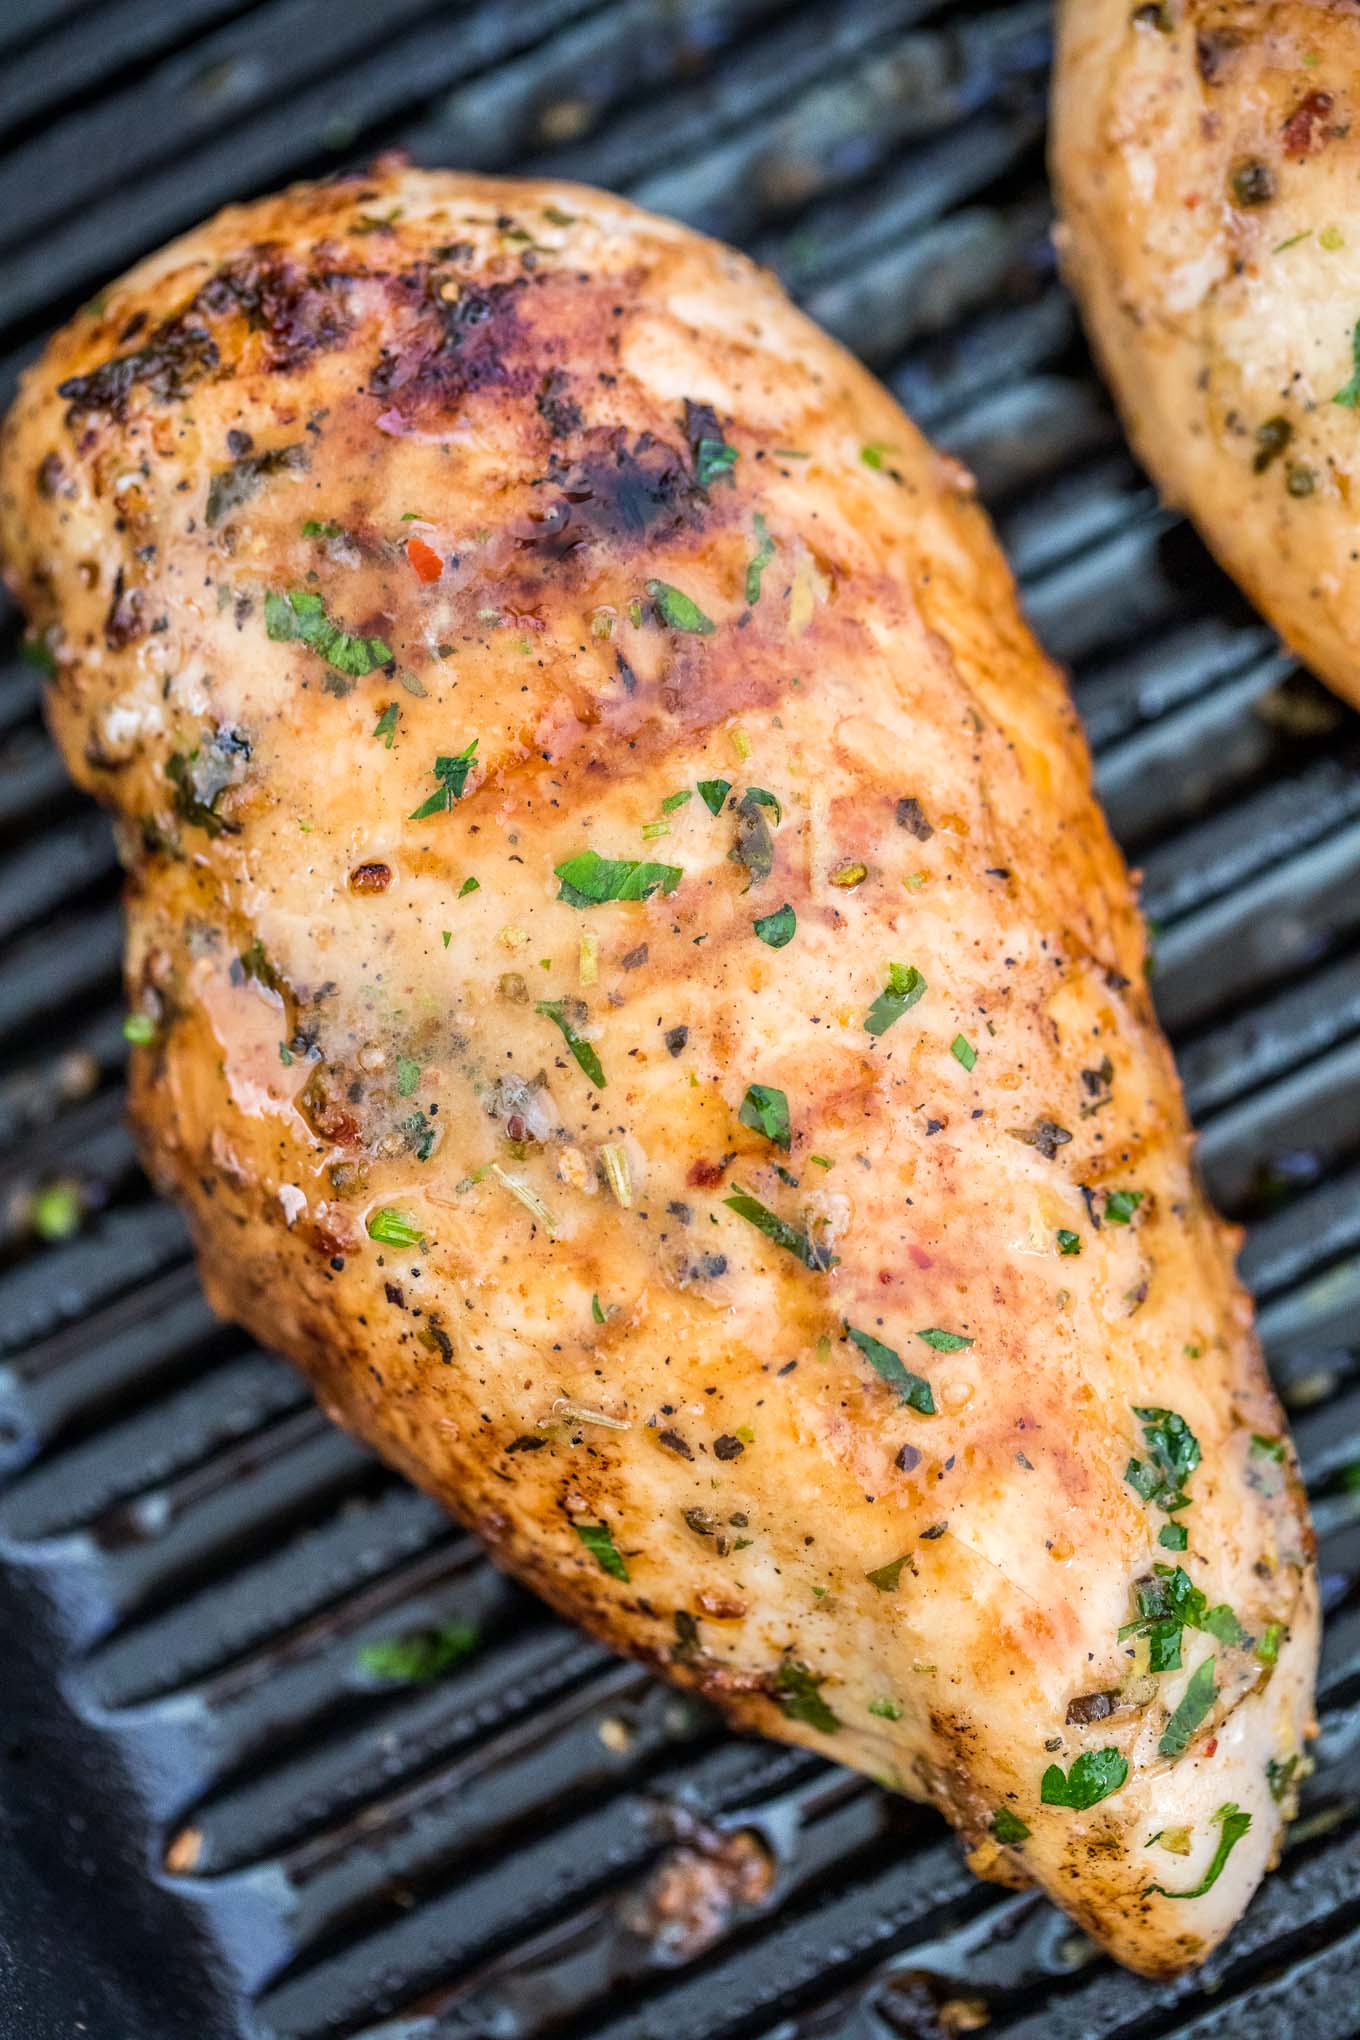 Oven Baked Chicken Breasts Recipe: Juicy & Flavorful [Video] - S&SM